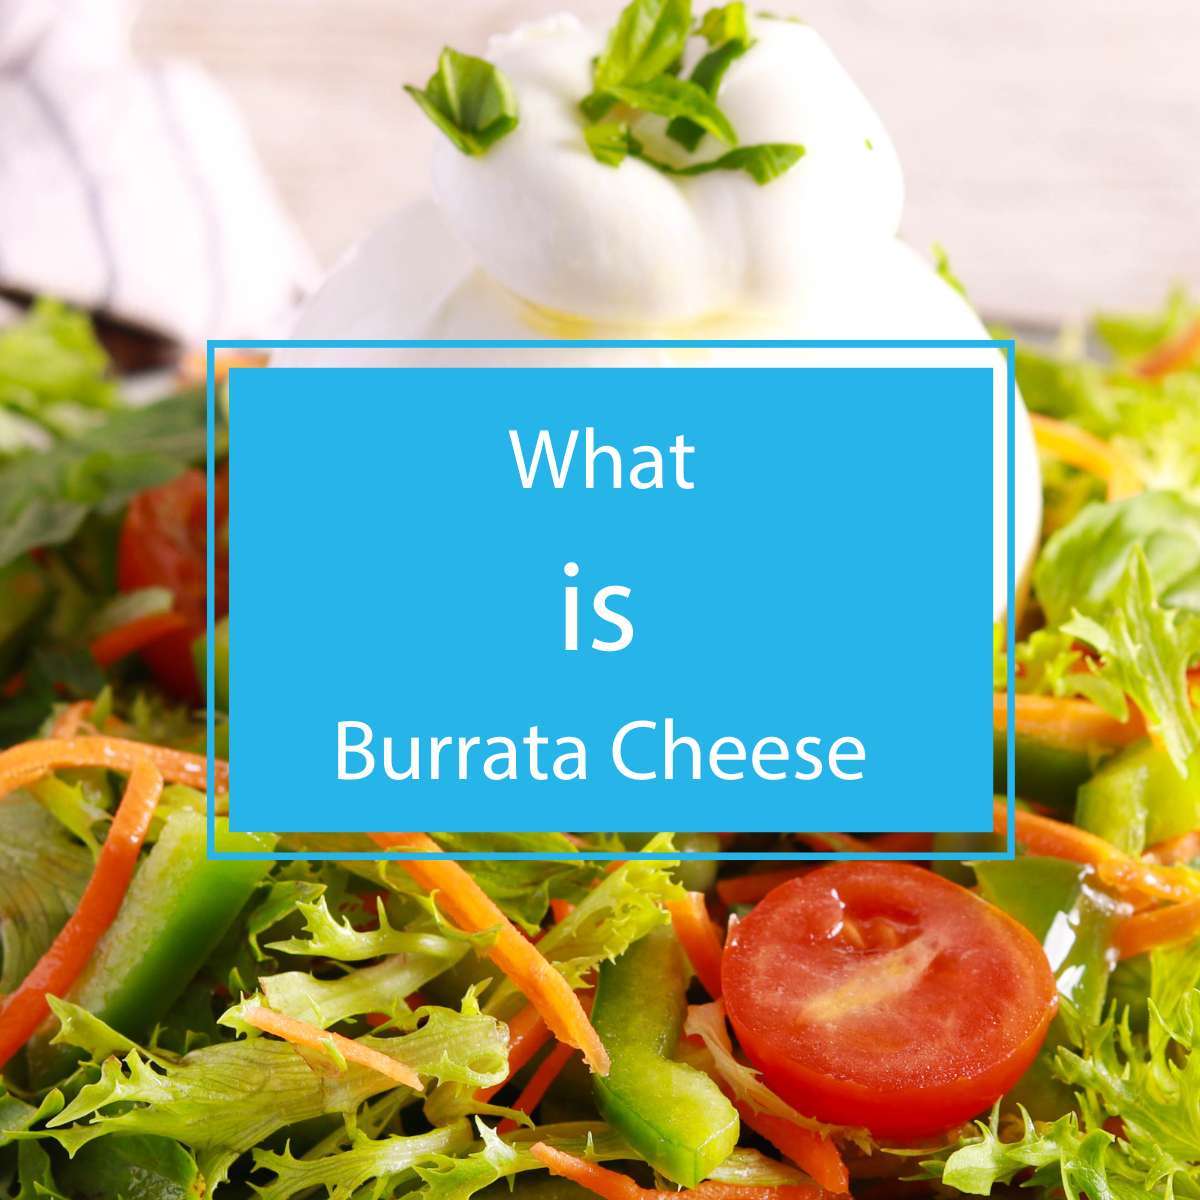 What Is Burrata Cheese